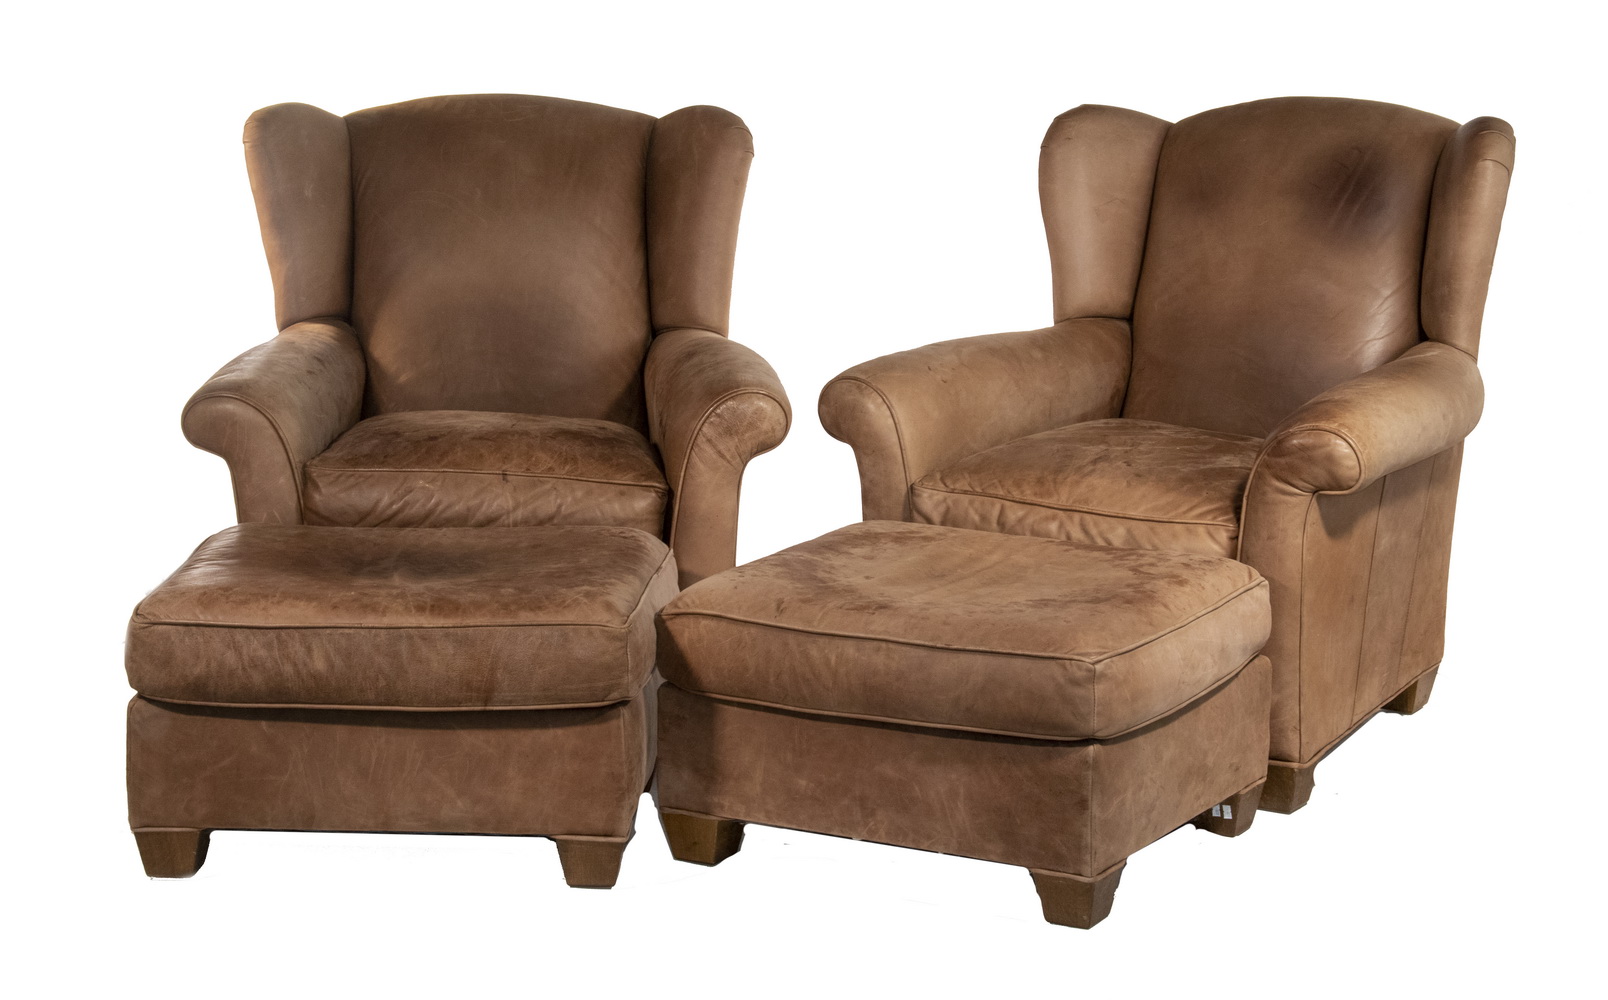 PR OF LEATHER CLUB CHAIRS WITH 2b50e7